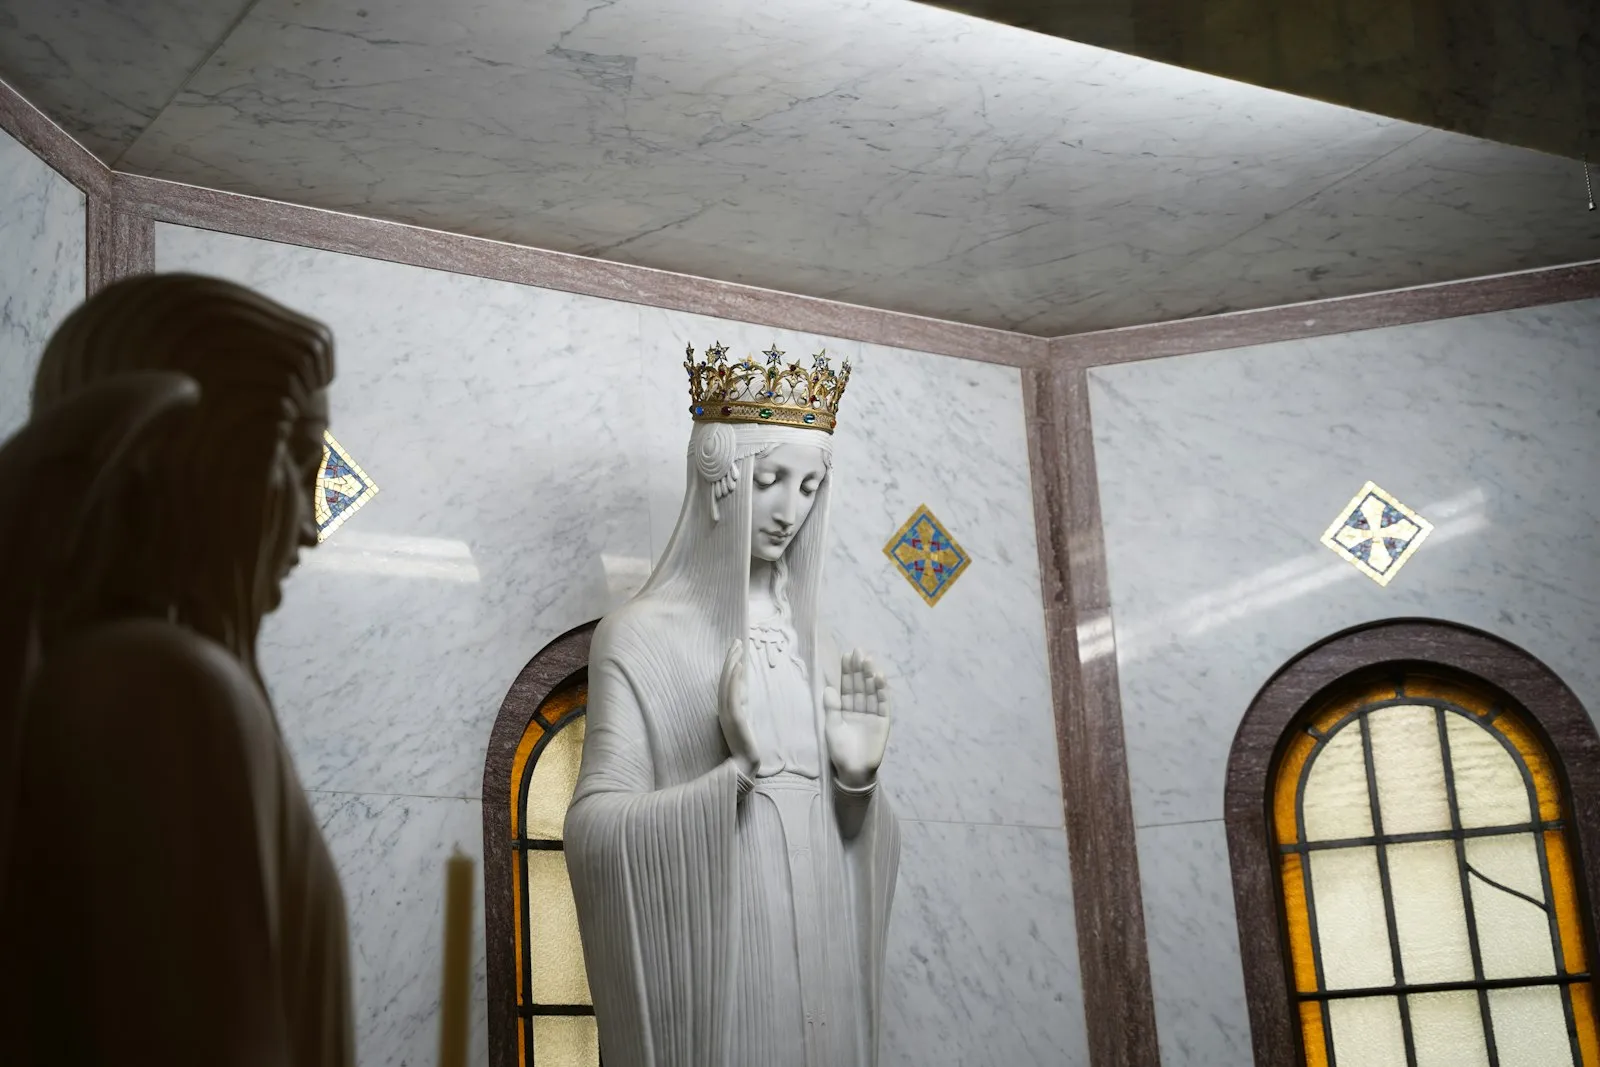 Crown restored to Marian statue at Michigan parish after missing for 44 years